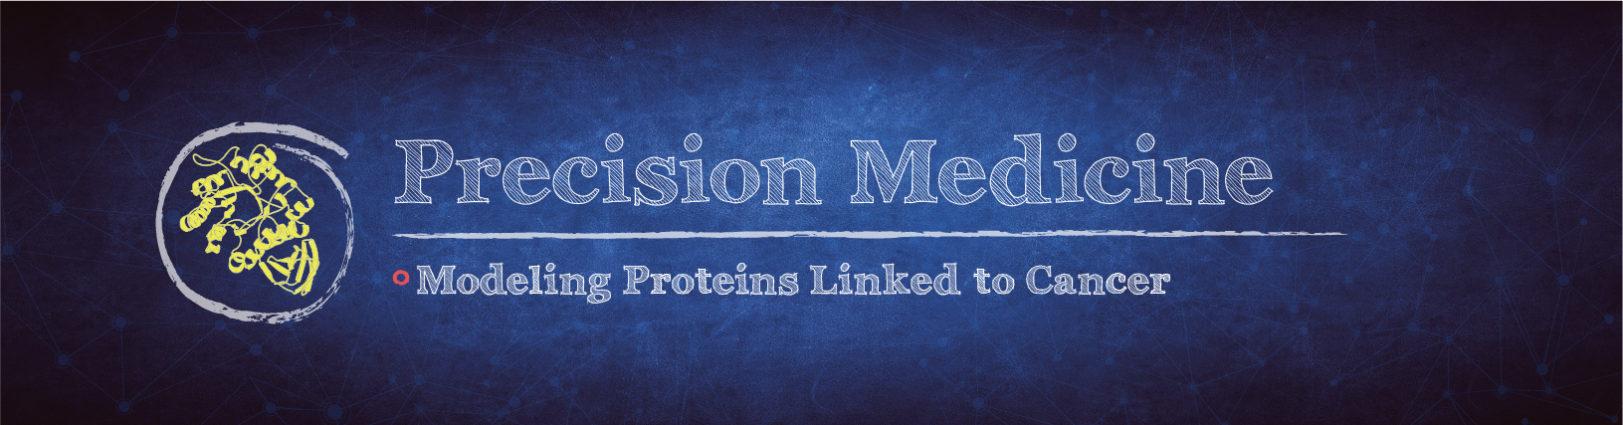 Drawing of proteins next to the text “Precision Medicine: Modeling Proteins Linked to Cancer” on a blue background